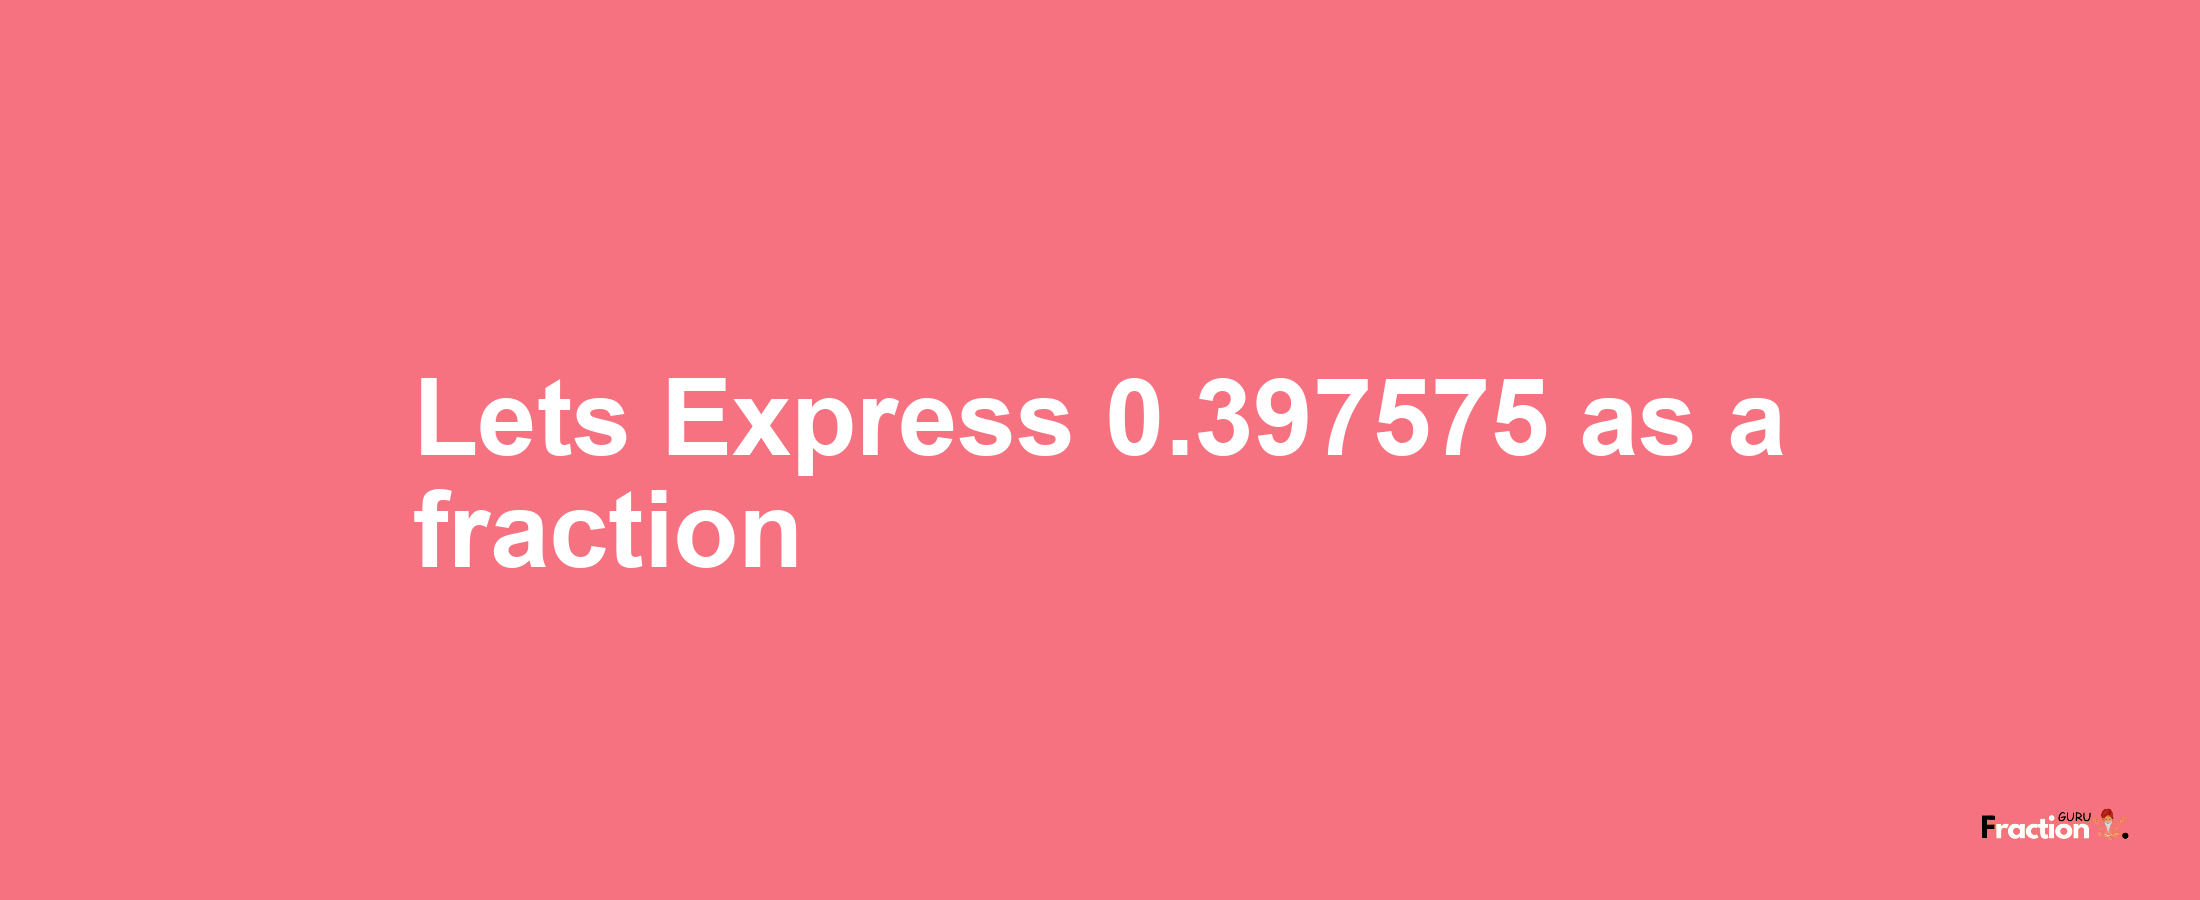 Lets Express 0.397575 as afraction